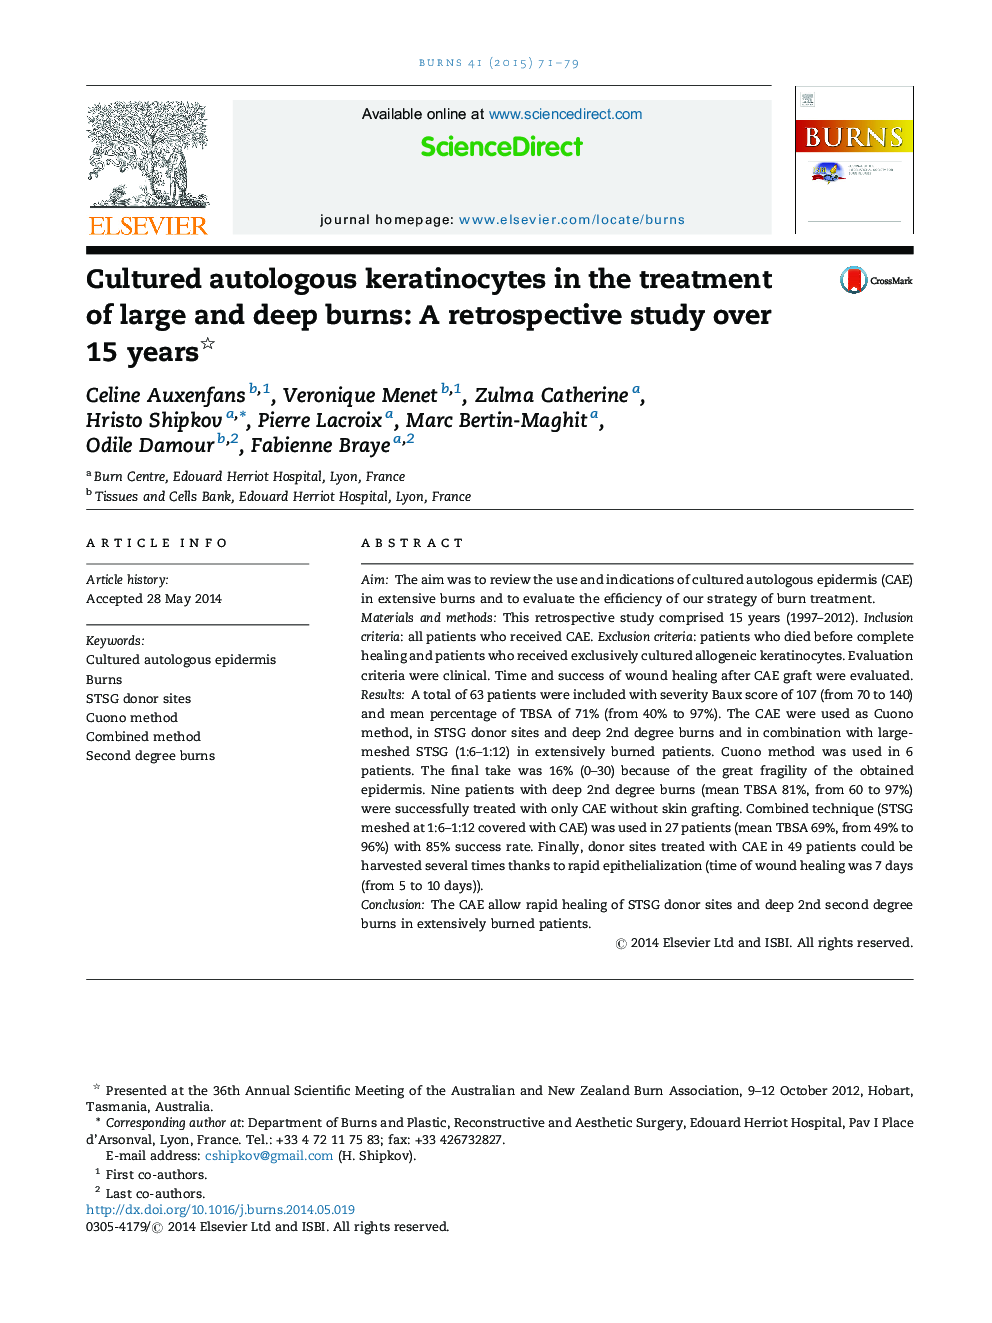 Cultured autologous keratinocytes in the treatment of large and deep burns: A retrospective study over 15 years 